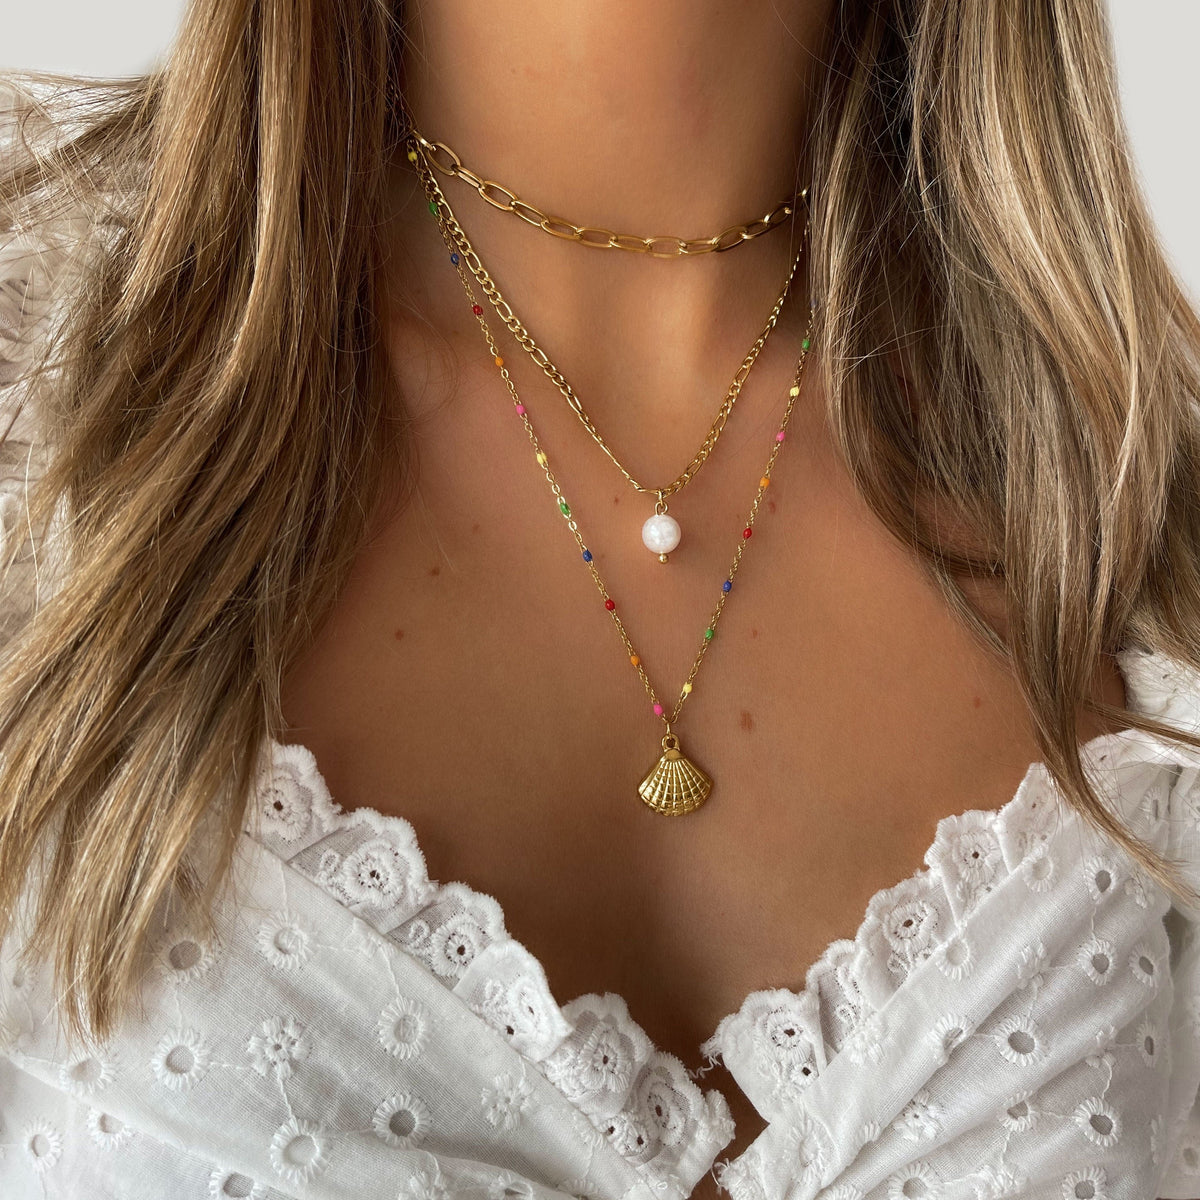 BohoMoon Stainless Steel Confetti Pearl Layered Necklace Gold